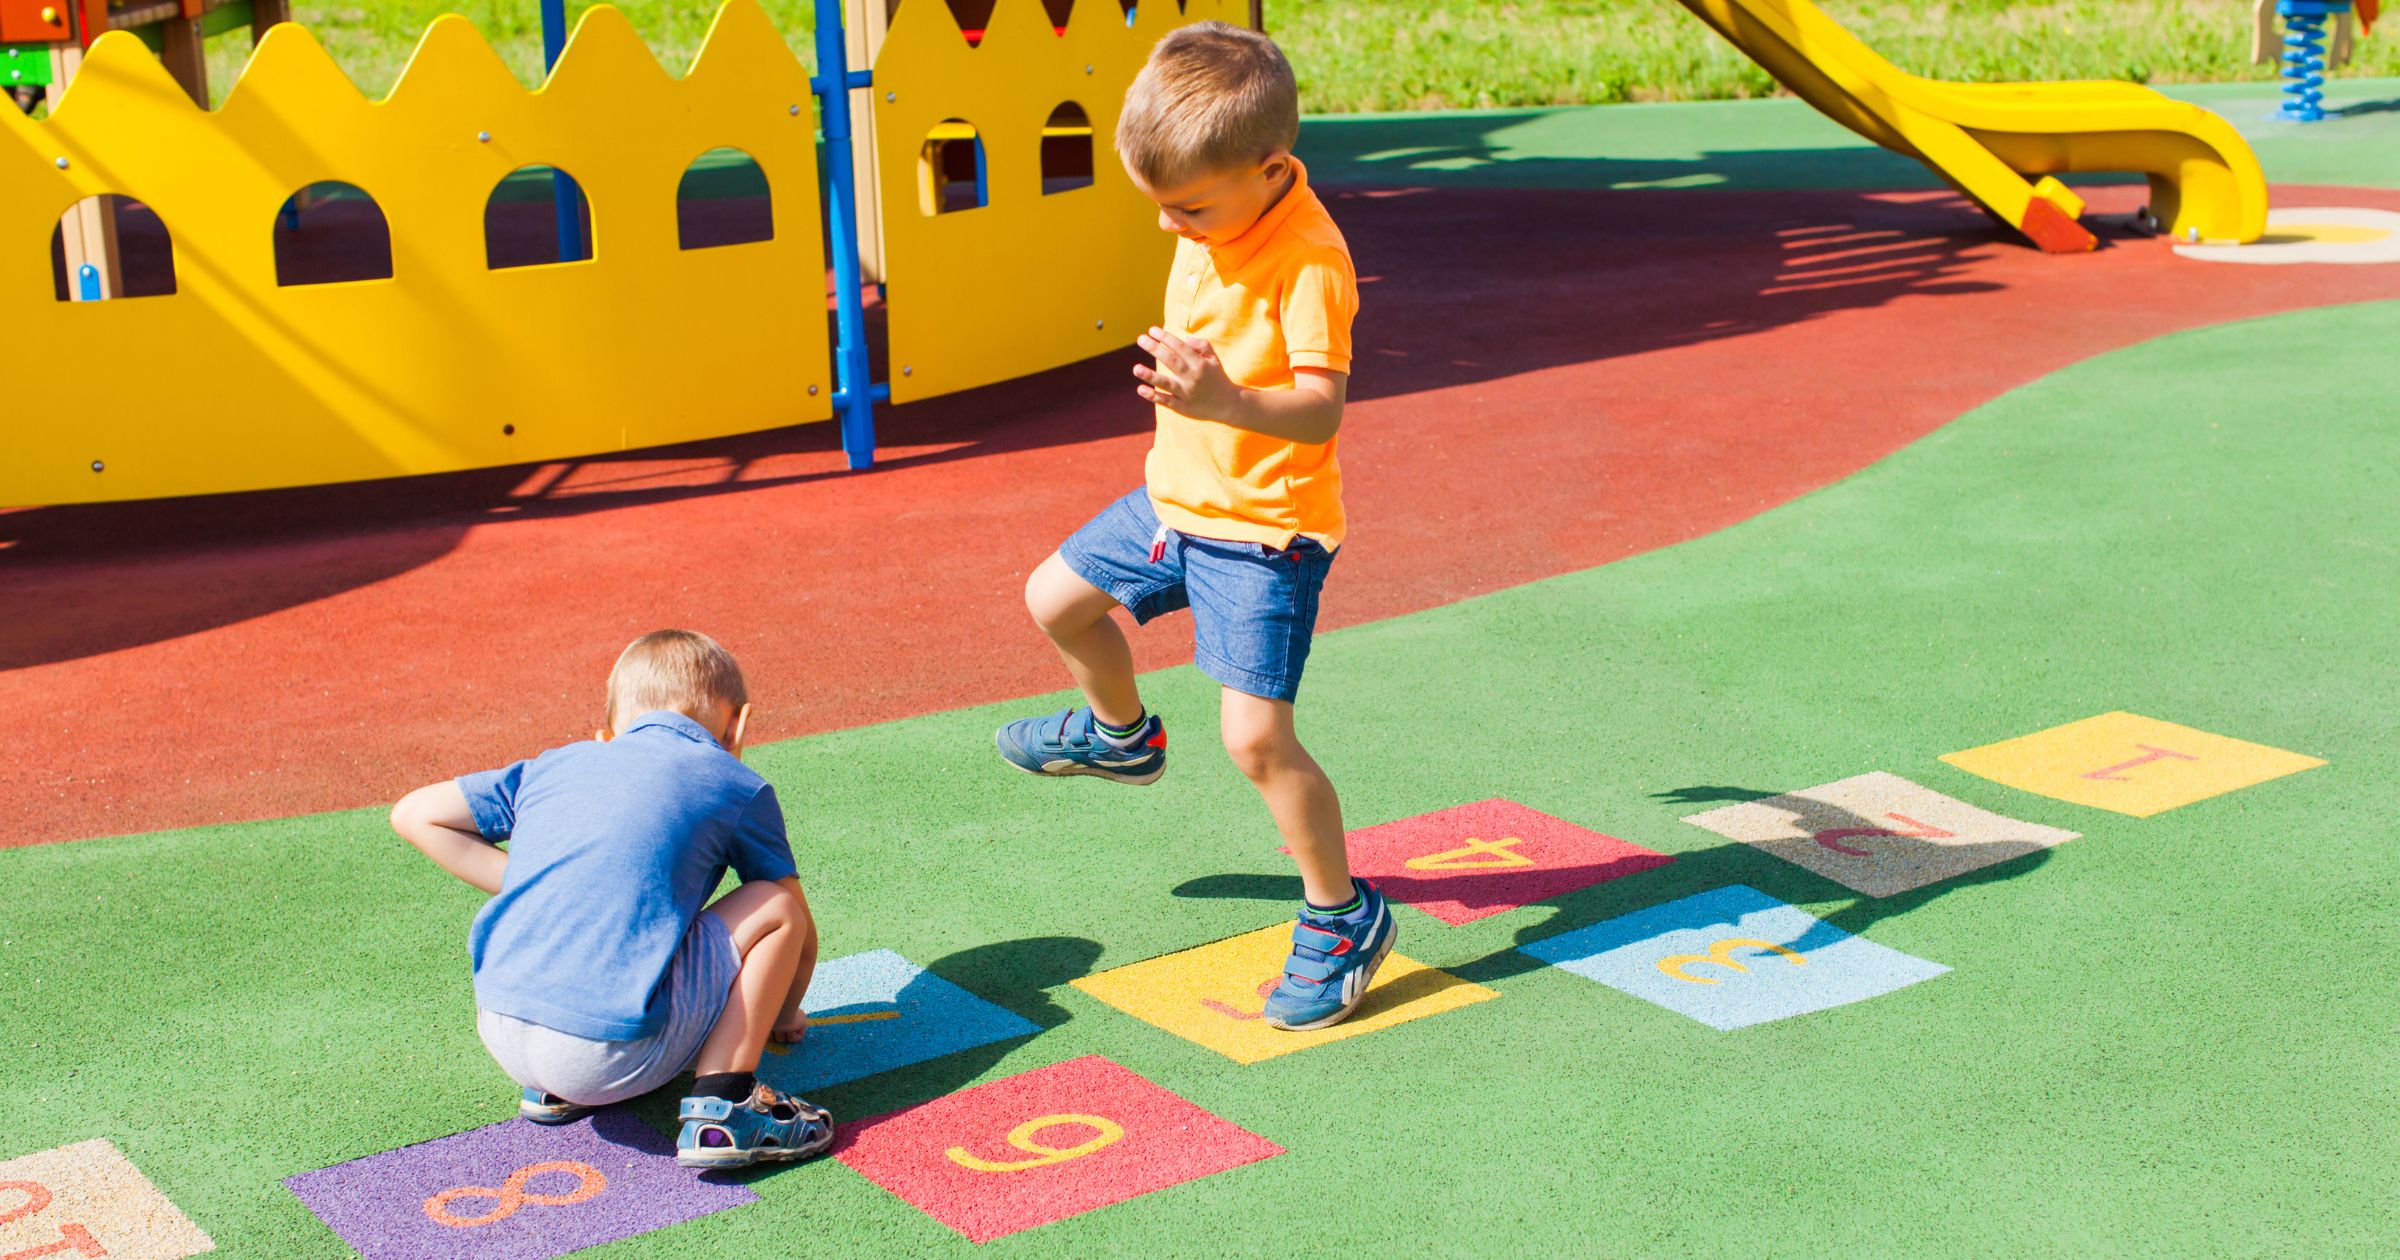 Summer nanny in Denver or Boulder needed for two children with close to full-time hours - children playing hopscotch on brightly colored playground